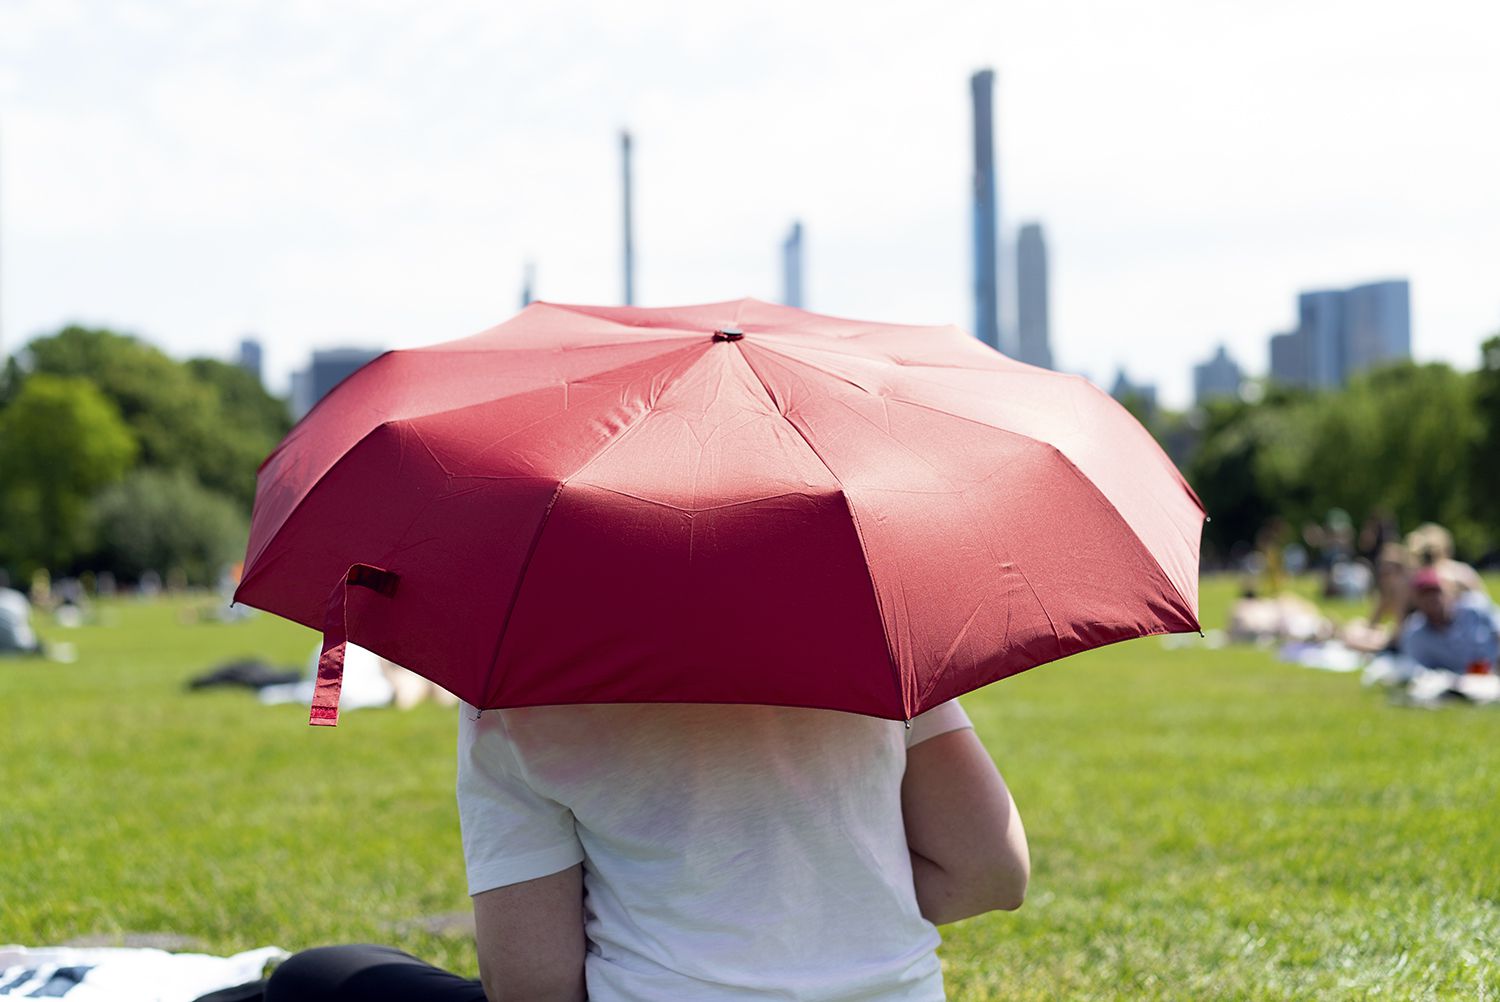 Travel Umbrellas That Will Keep You Dry in 2022